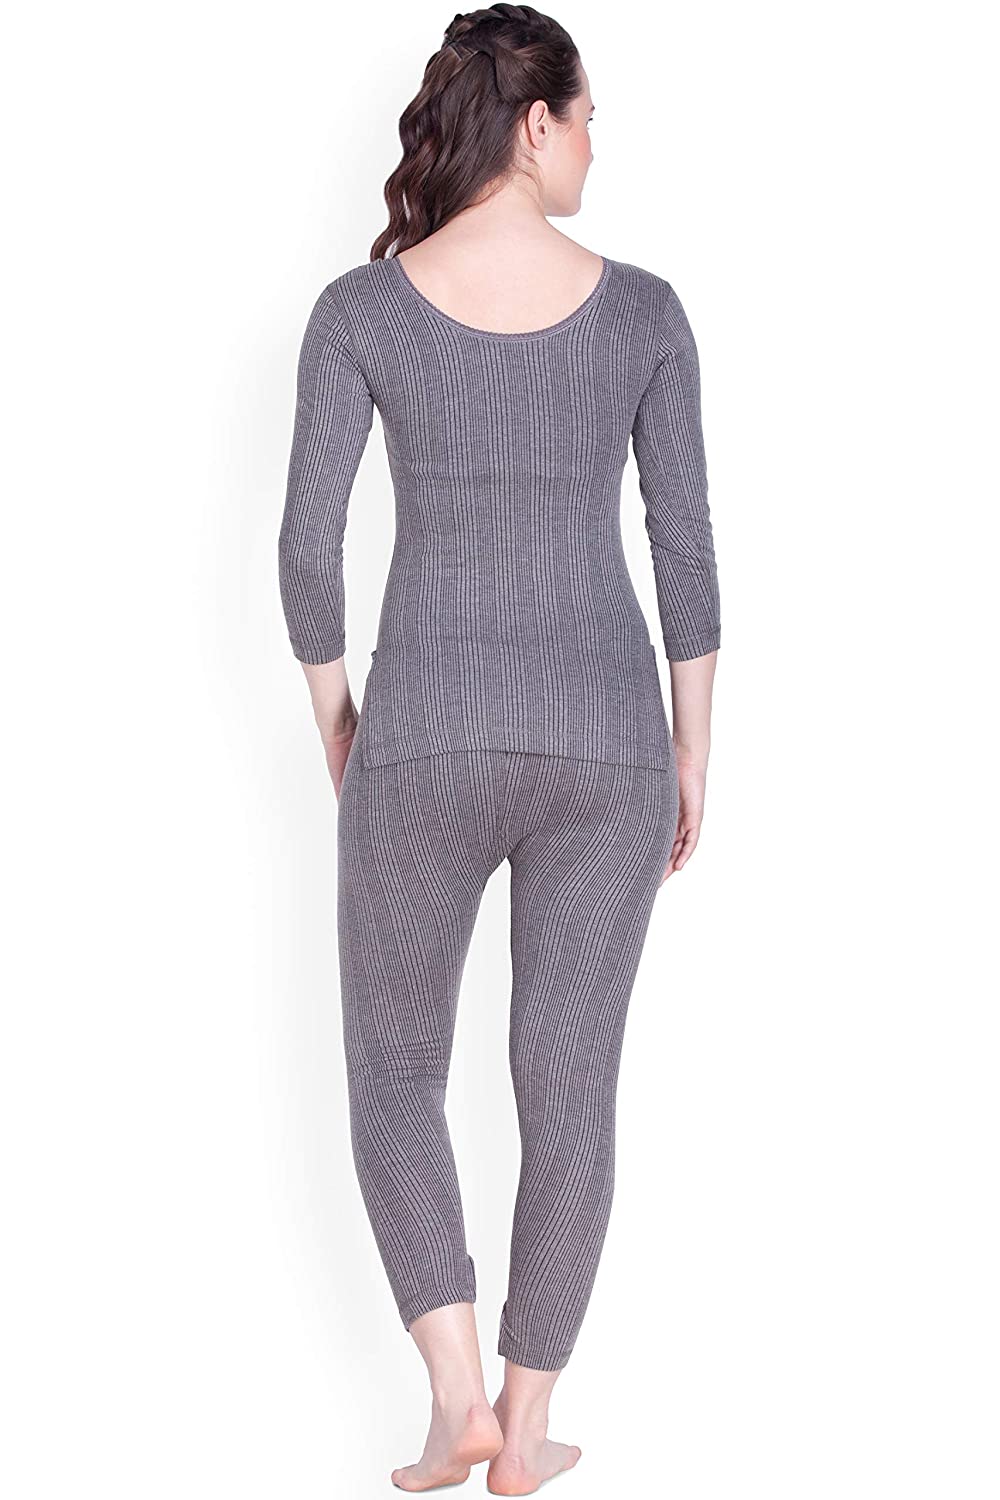 Lux Inferno Women's Plain/Solid Thermal Set